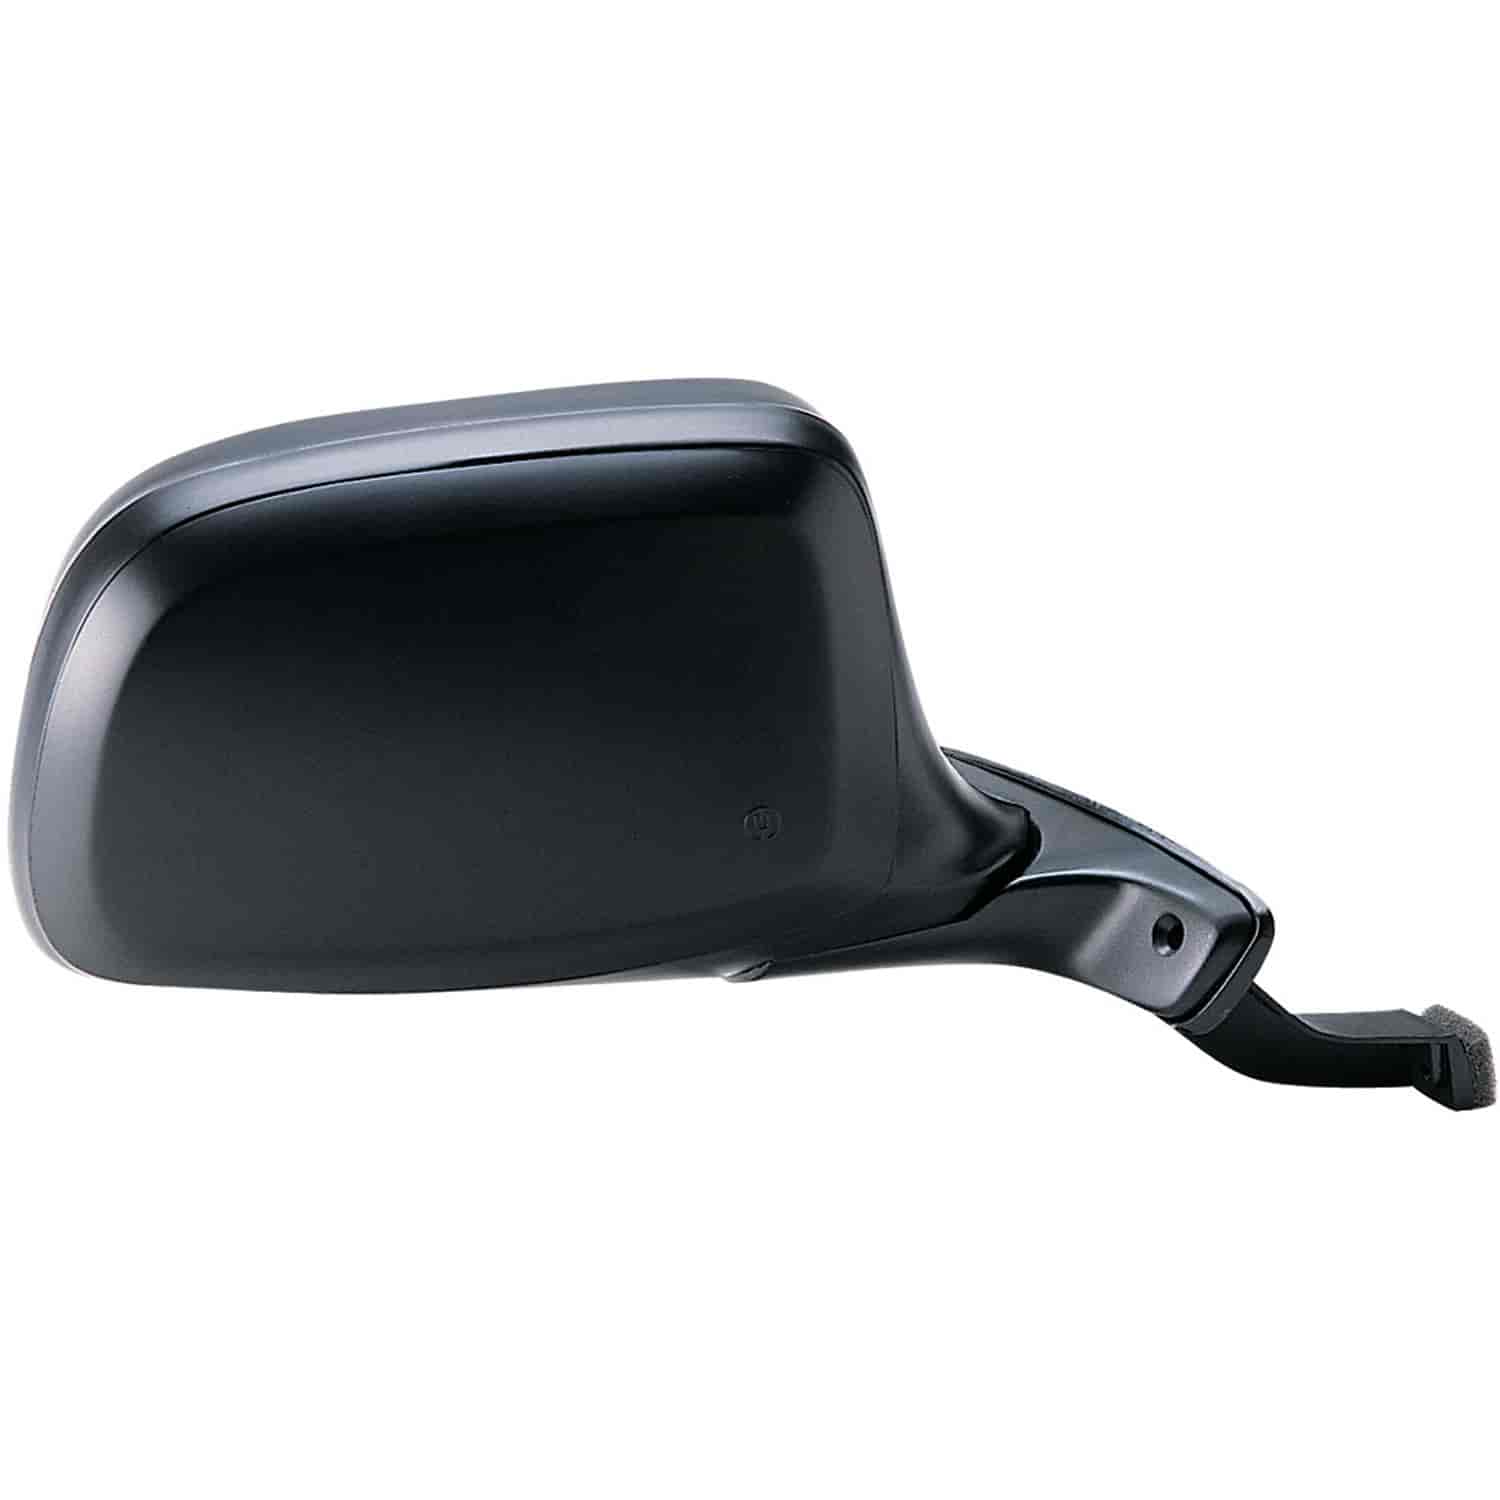 OEM Style Replacement mirror for 92-96 Bronco F150